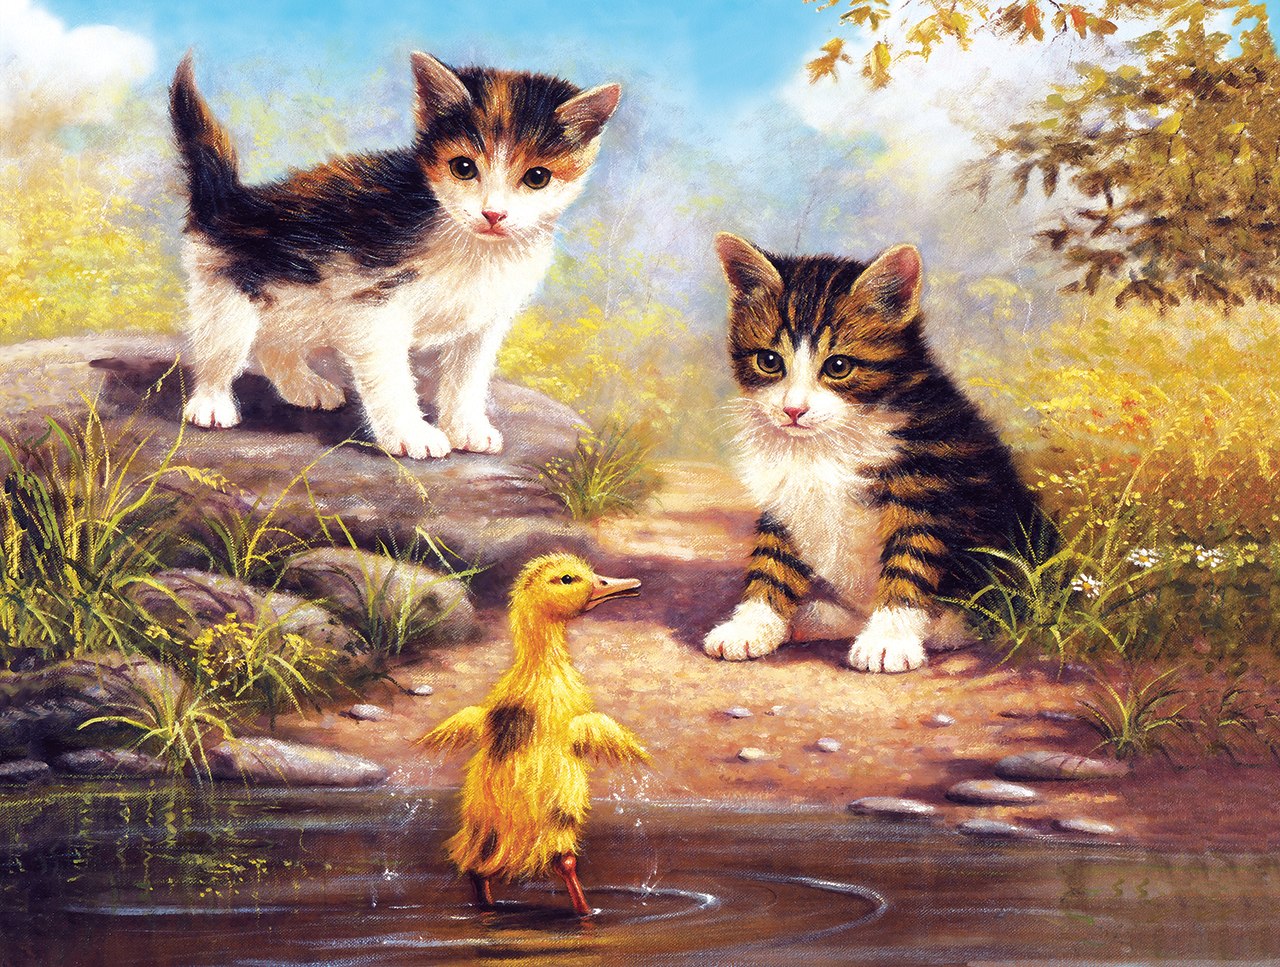 Just Been for a Swim - 500pc Jigsaw Puzzle By Sunsout  			  					NEW